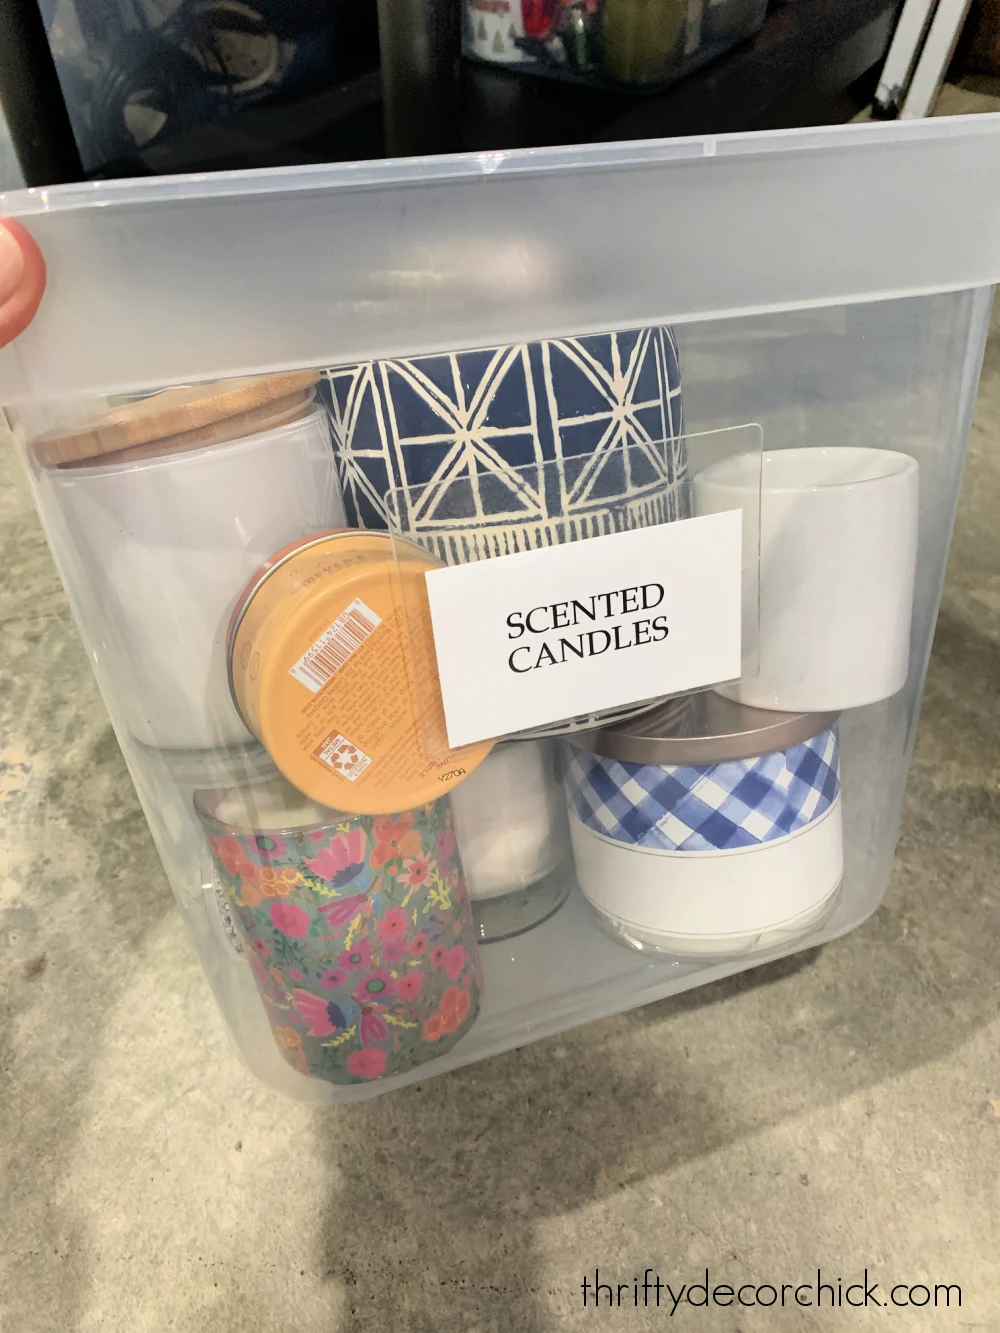 plastic bins for storing candles